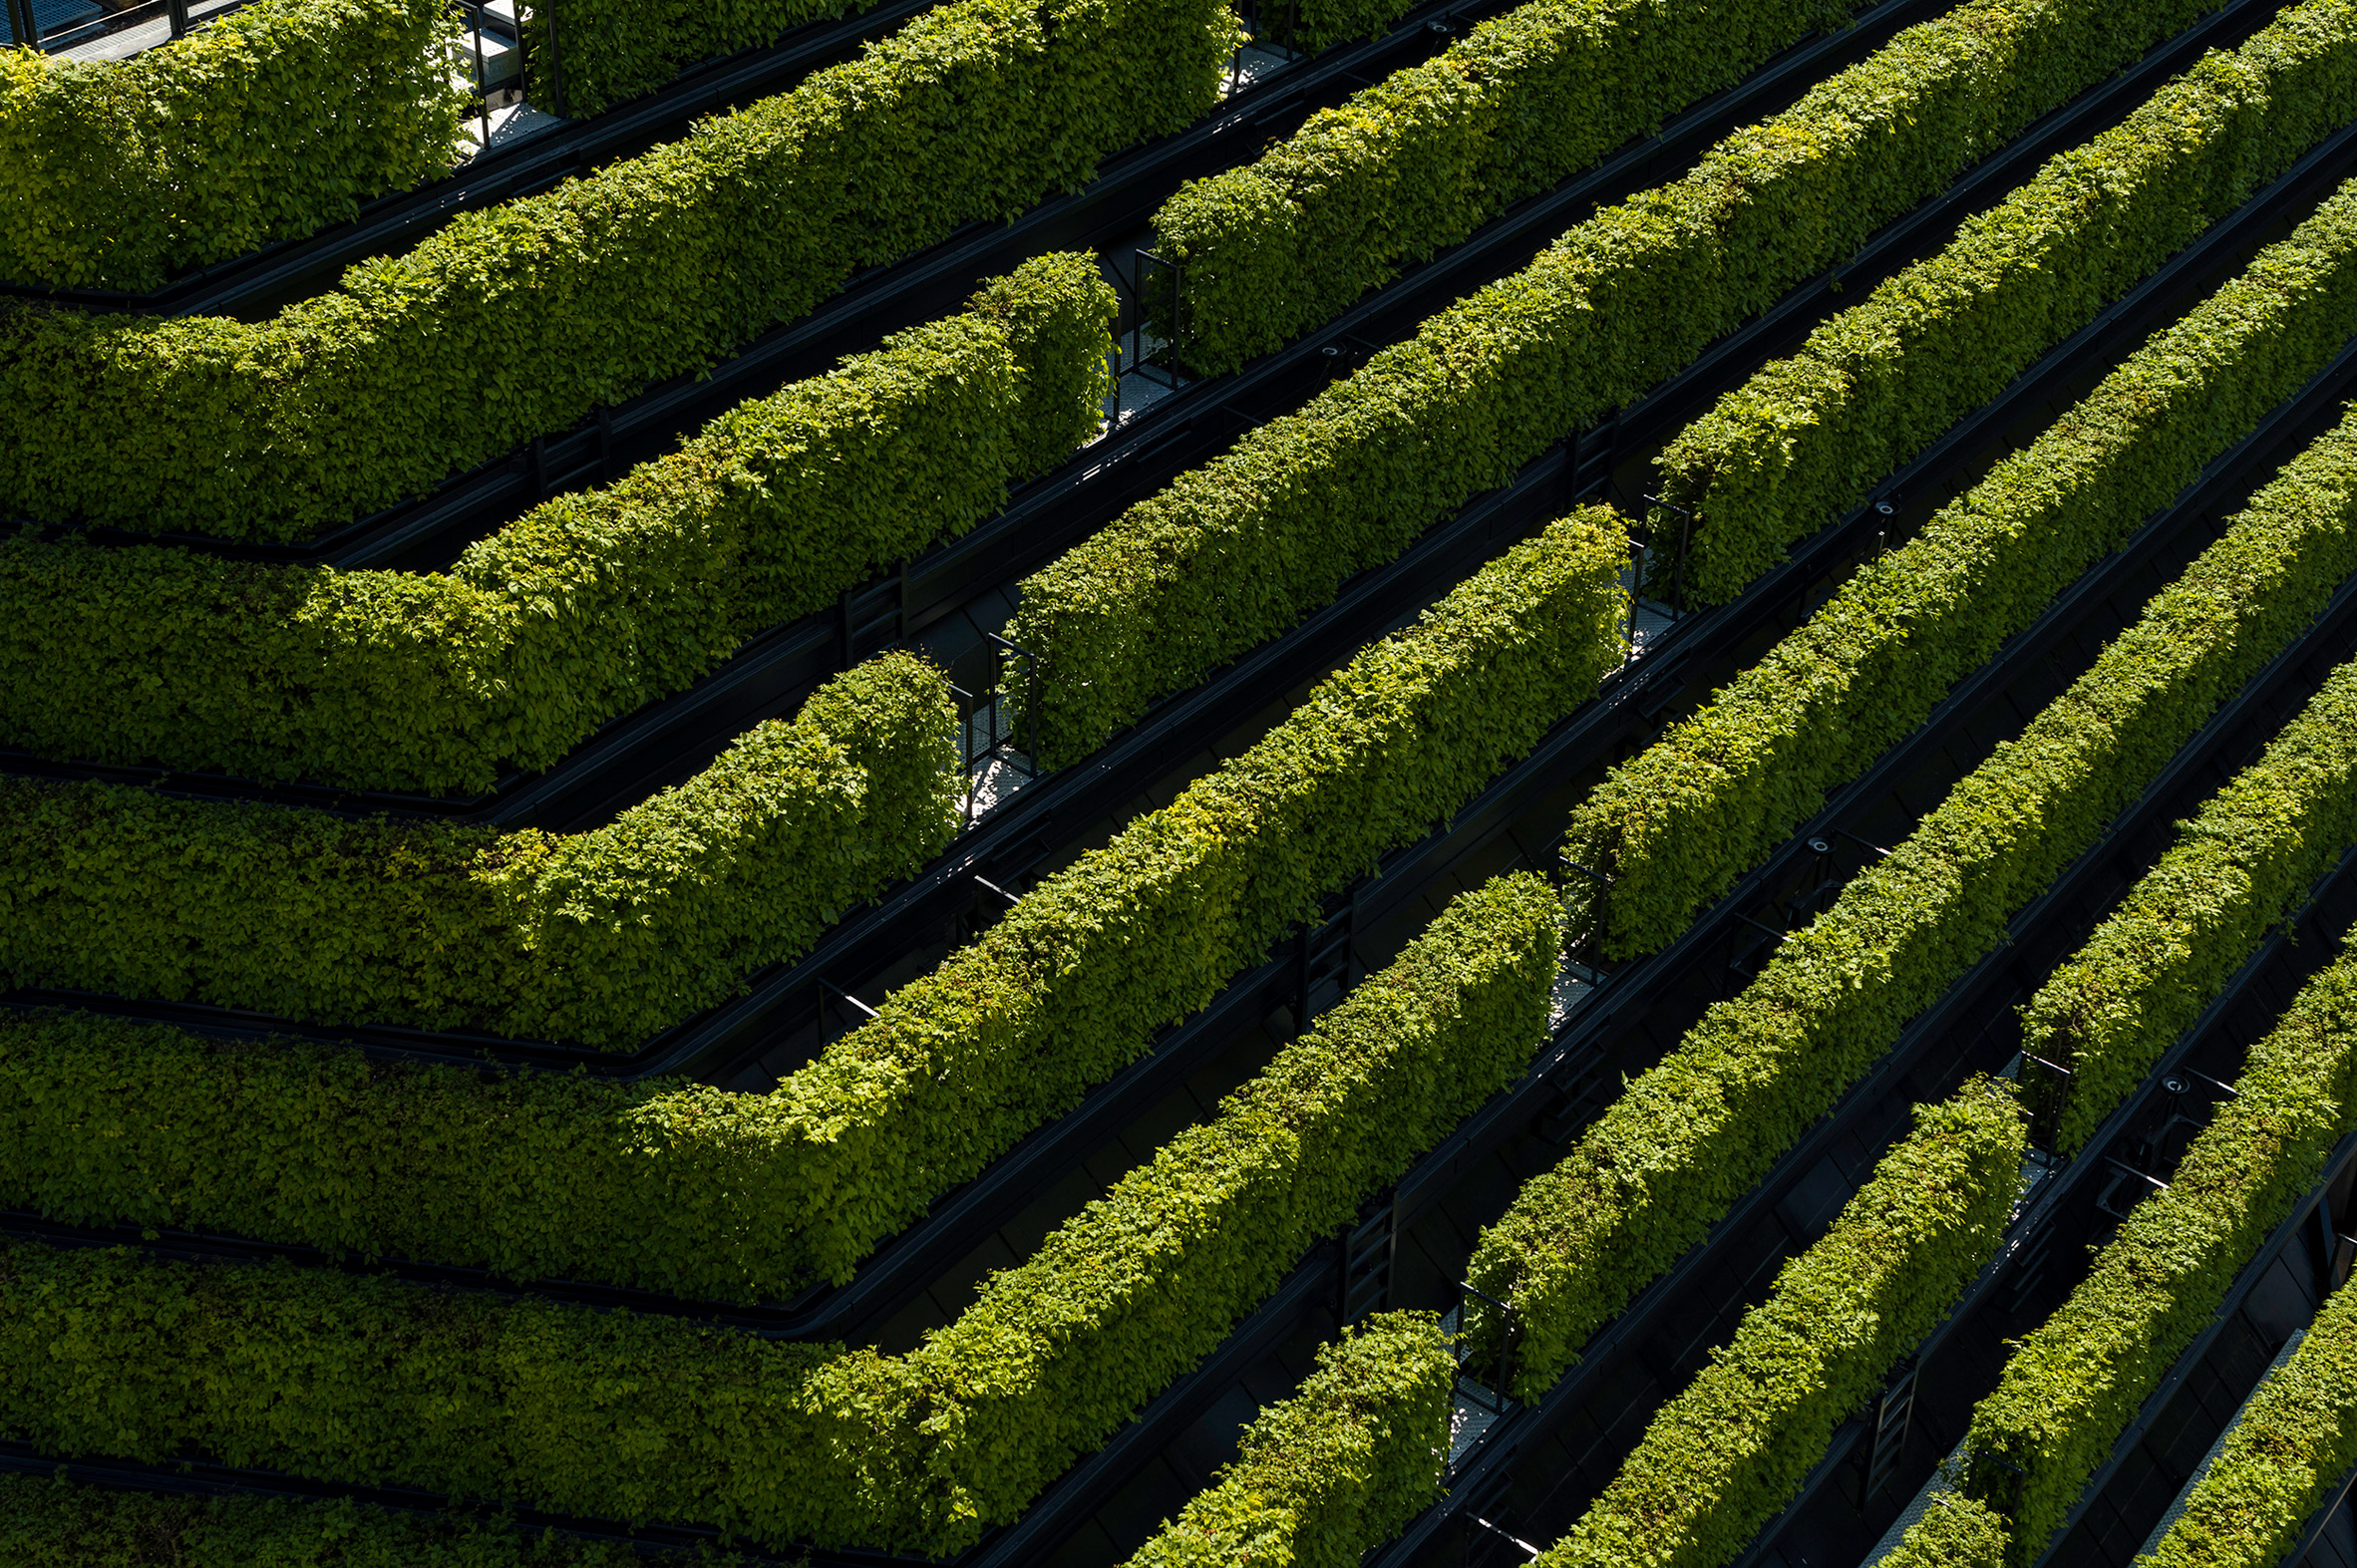 Kö-Bogen II office in Düsseldorf by Ingenhoven Architects is covered with five miles of hedges